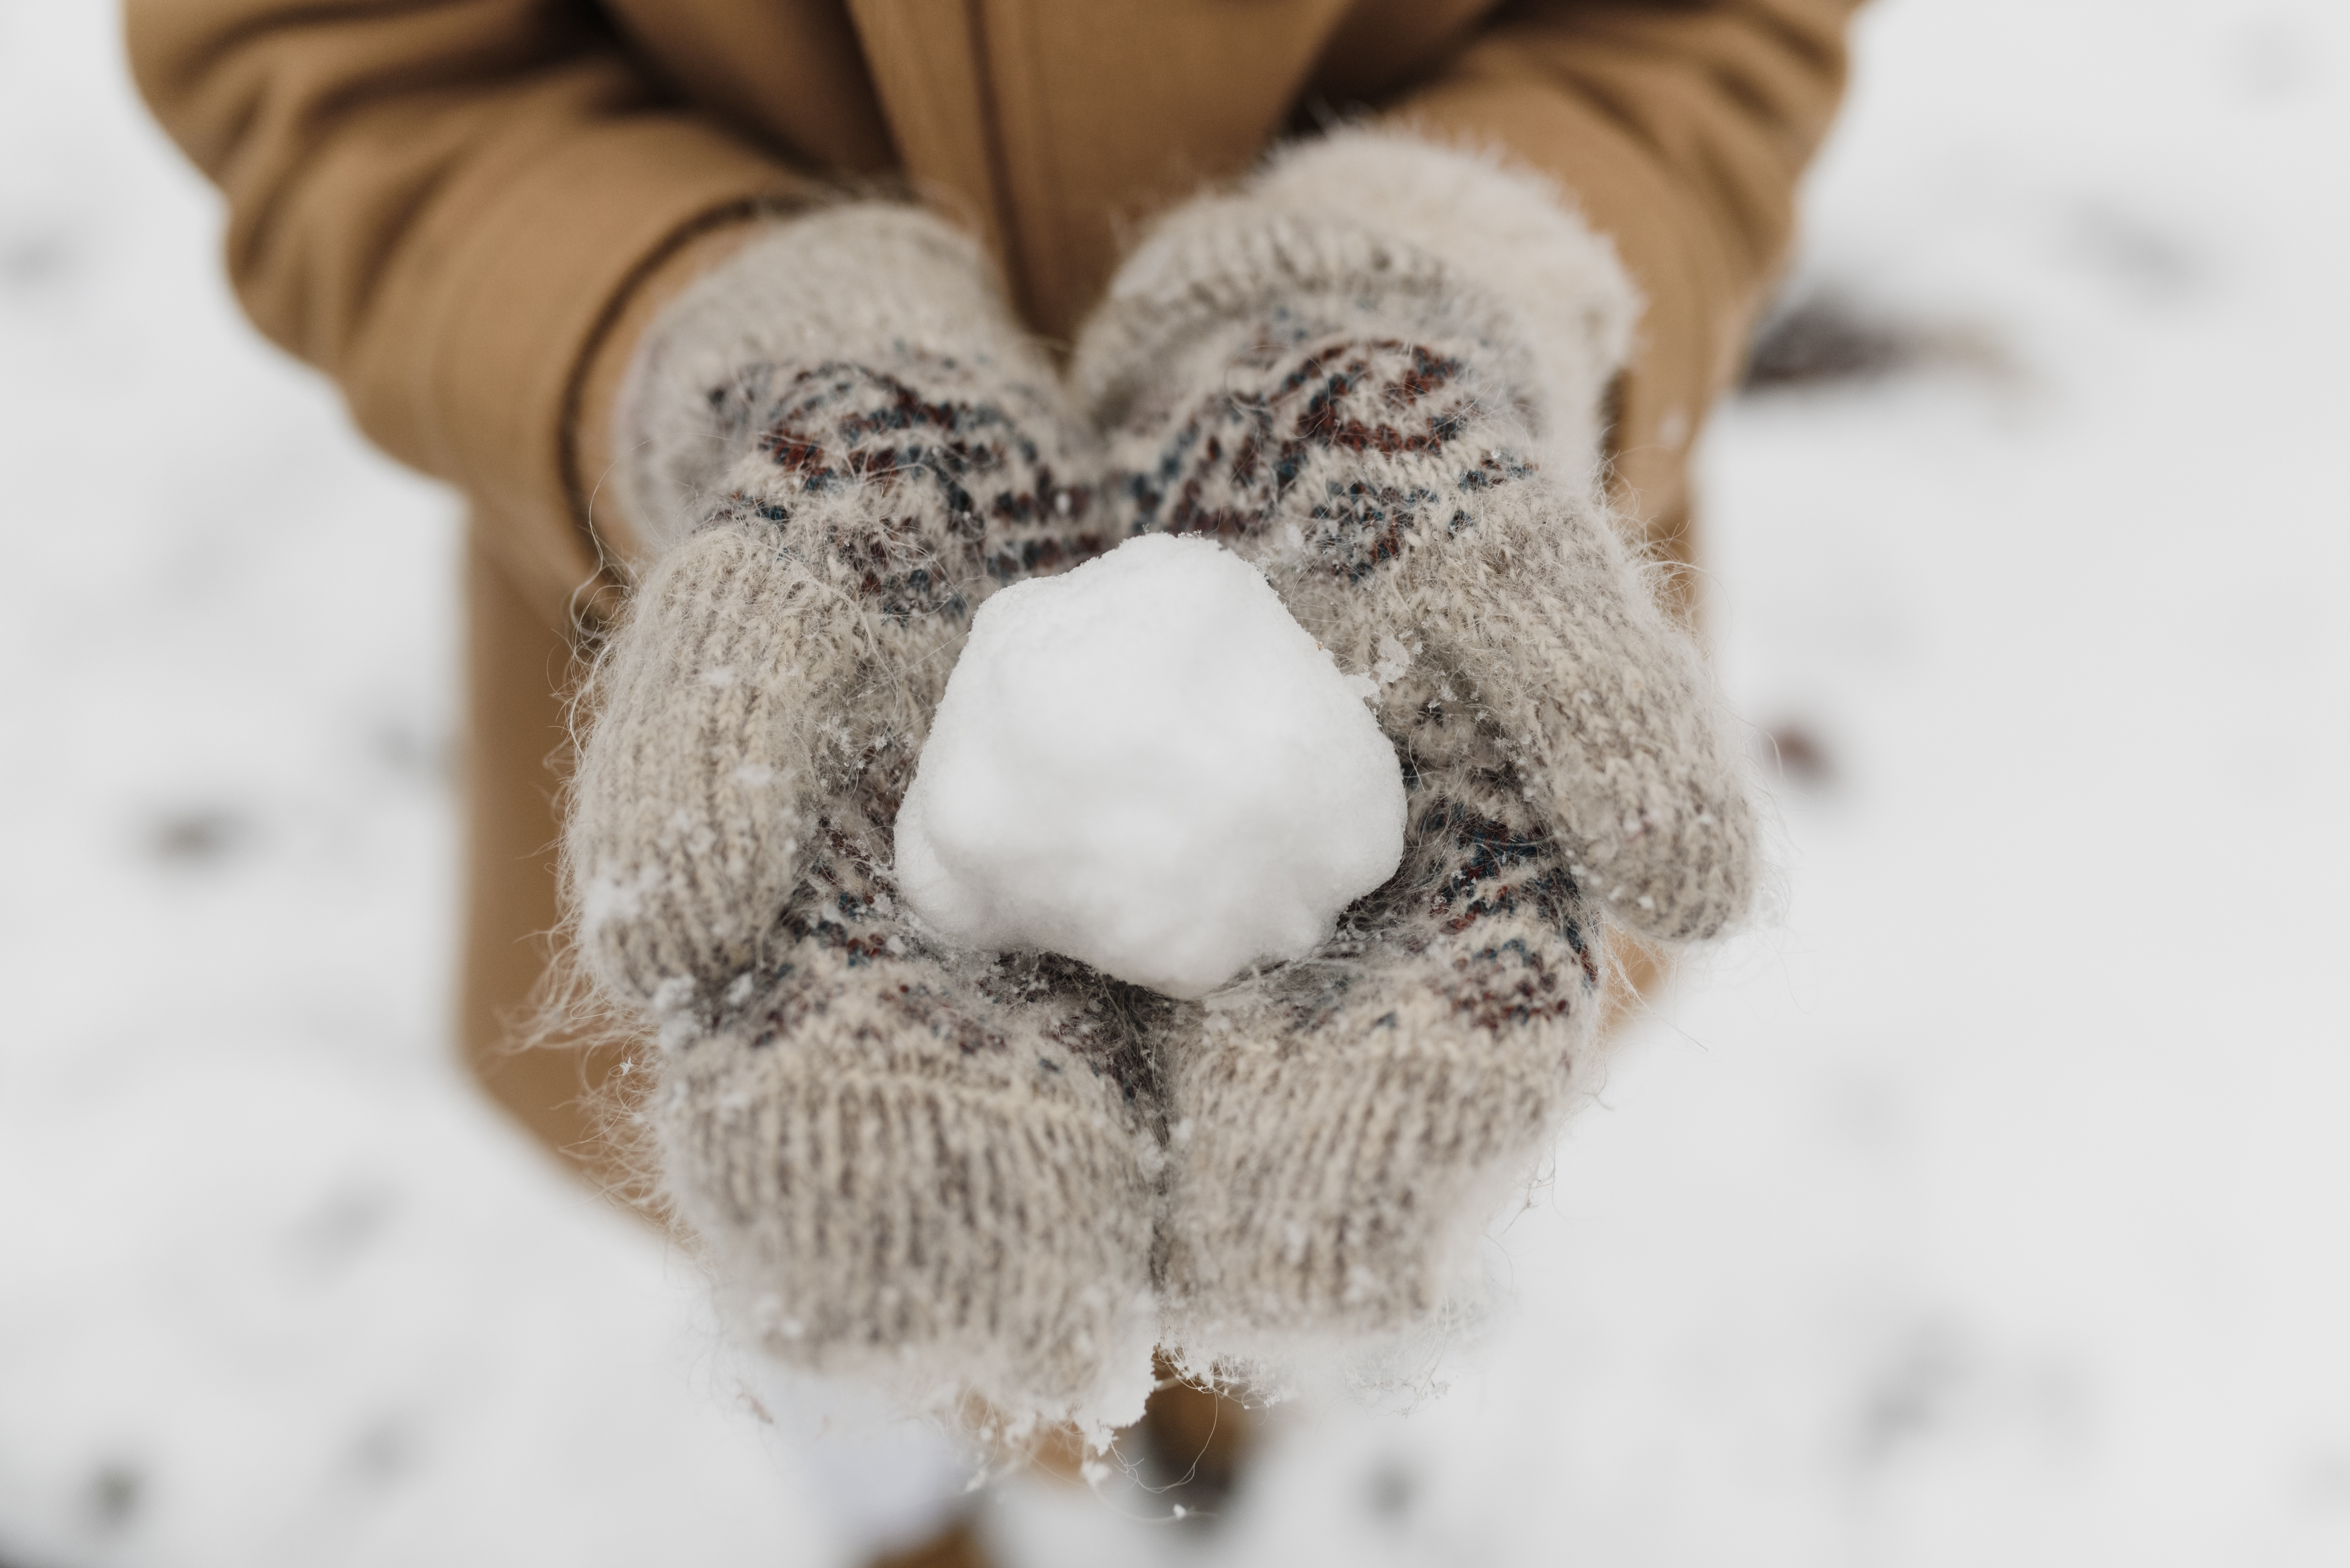 A person wearing knitted gloves holding a snow